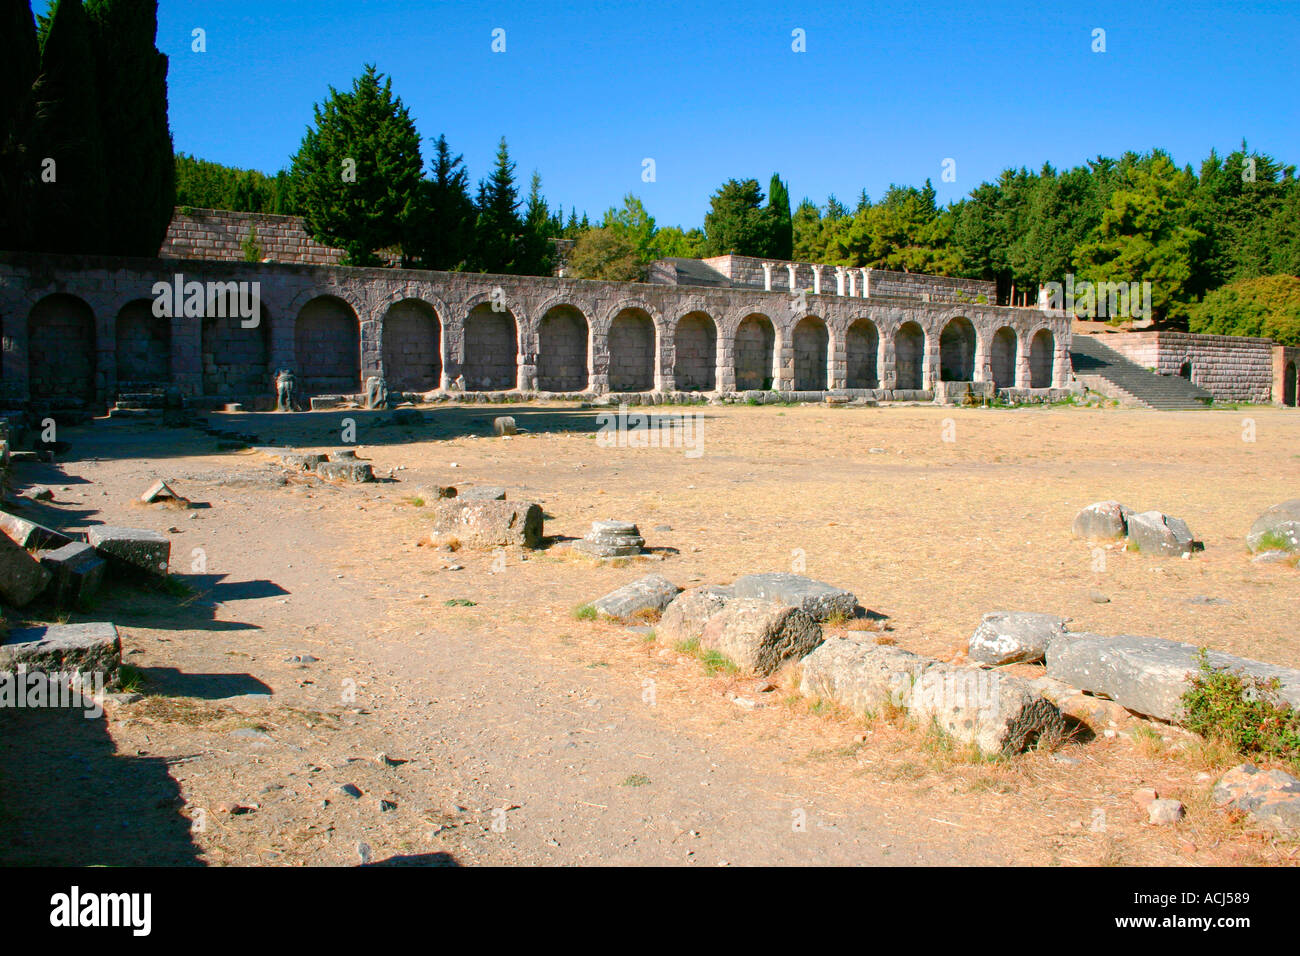 The Asklepieion lower level on the Greek island of Kos in the Aegean. Stock Photo